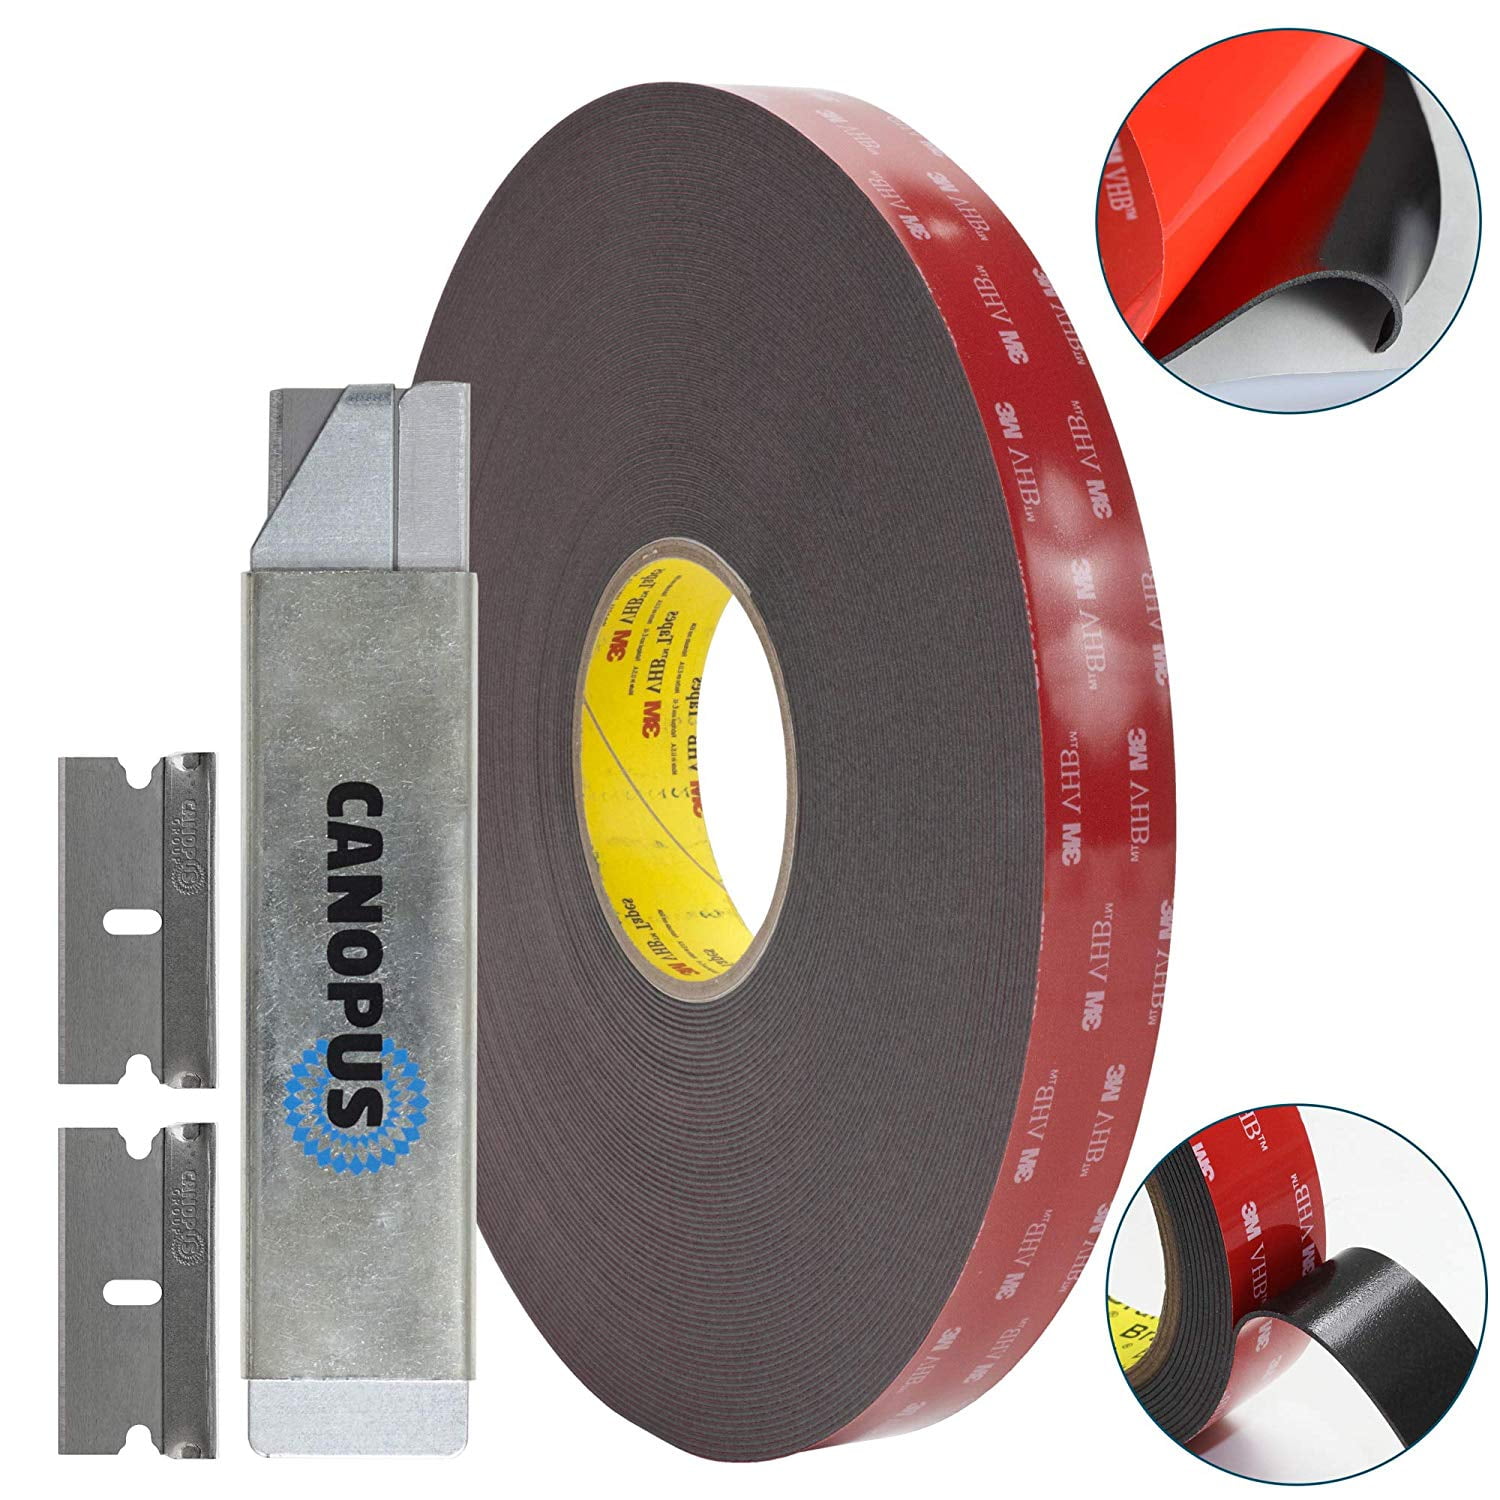 0.5 in Black 0.012 in x 15 ft Thick 3M VHB 5909 Permanent Bonding Tape Conformable Foam Tape Roll for Smooth Thin Bond Lines 